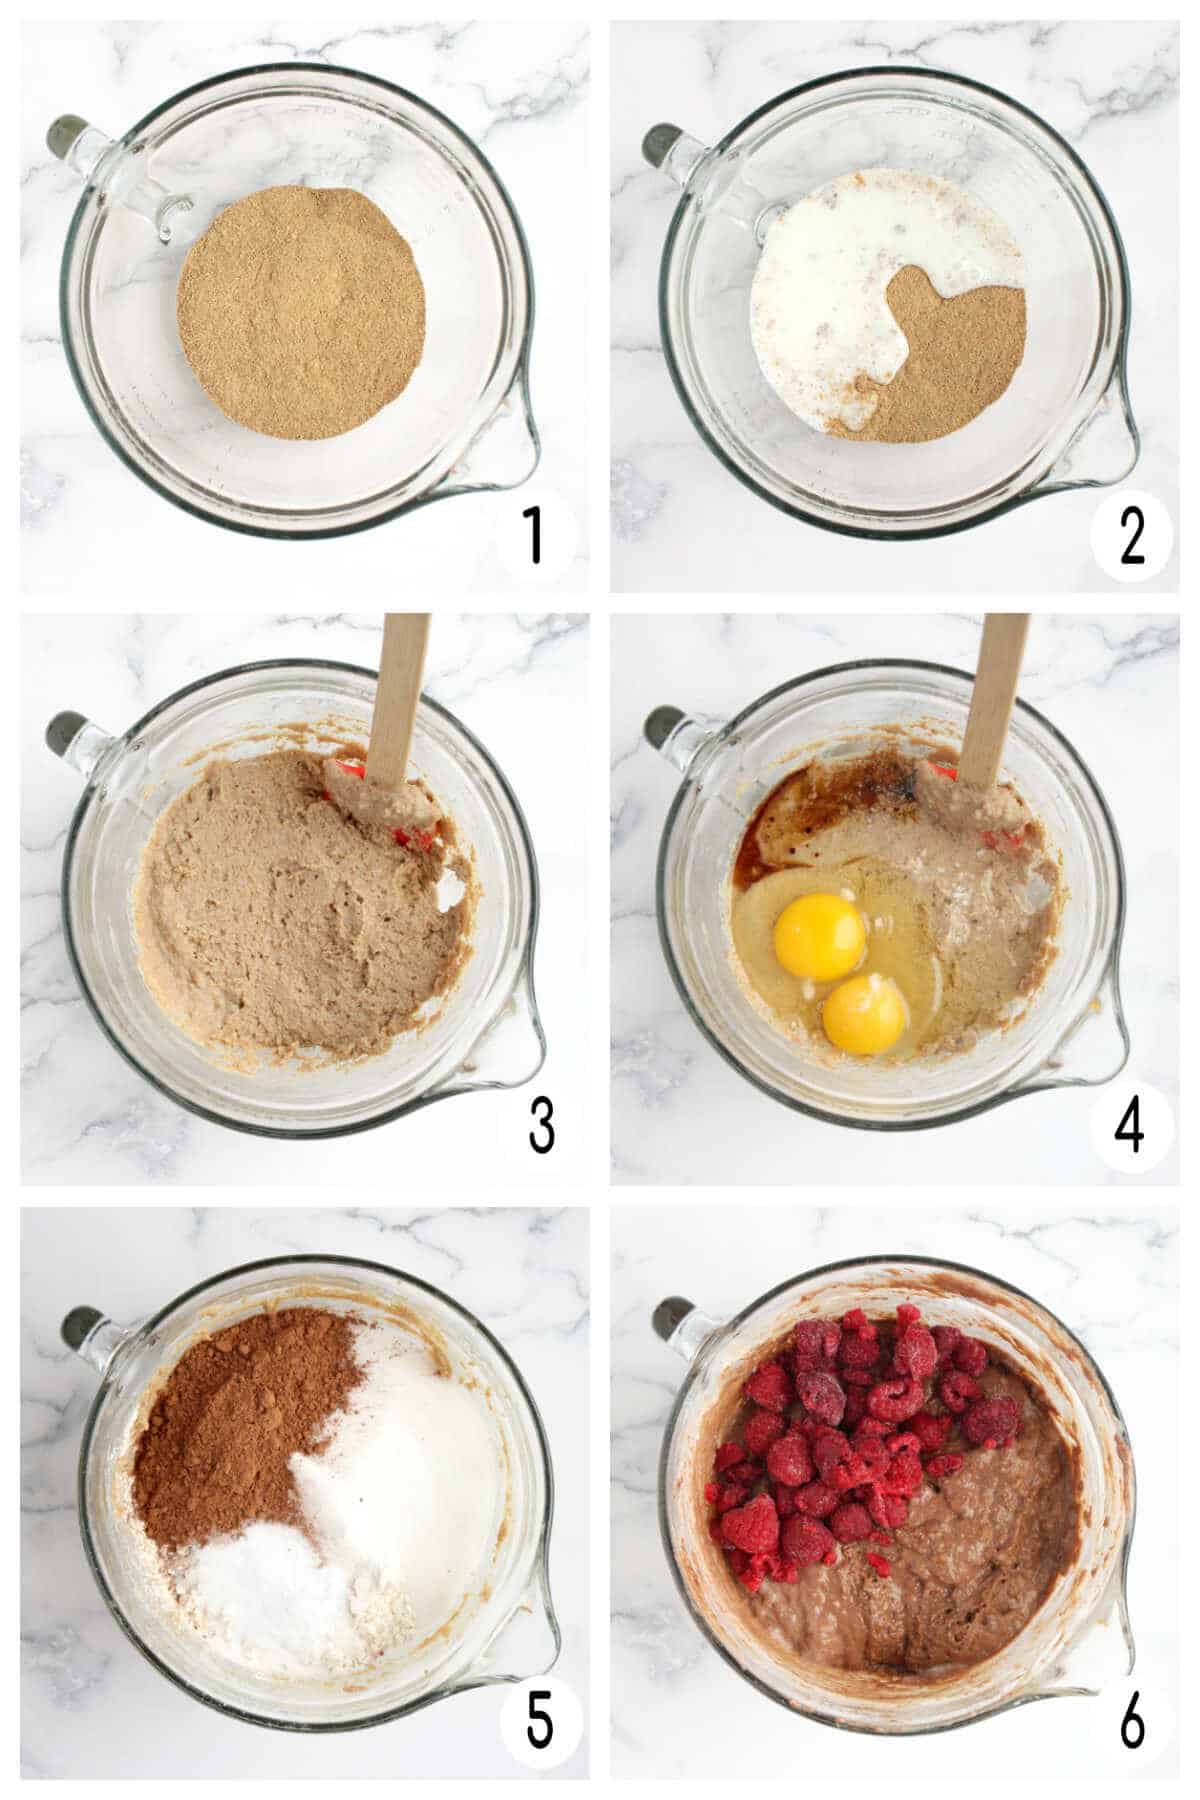 process shots for how to make chocolate raspberry bran muffins